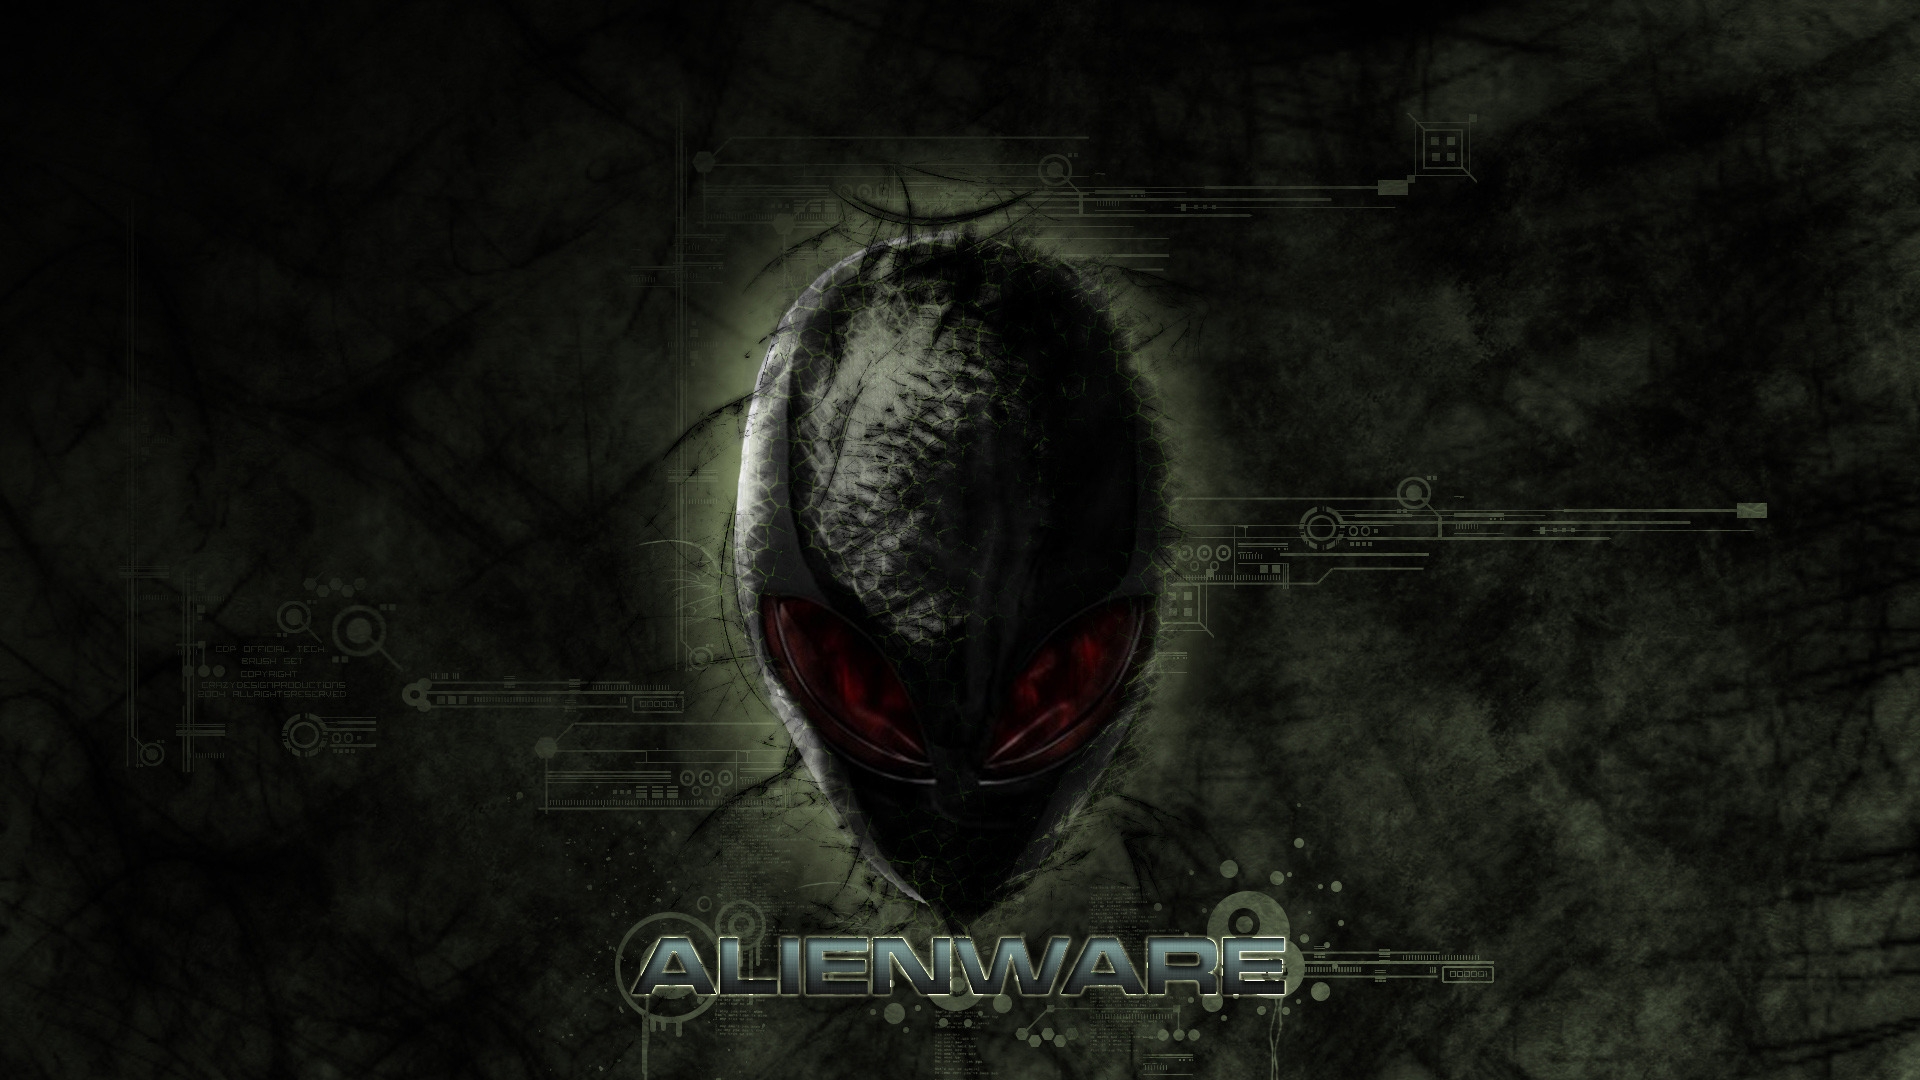 Cool Alienware for 1920 x 1080 HDTV 1080p resolution